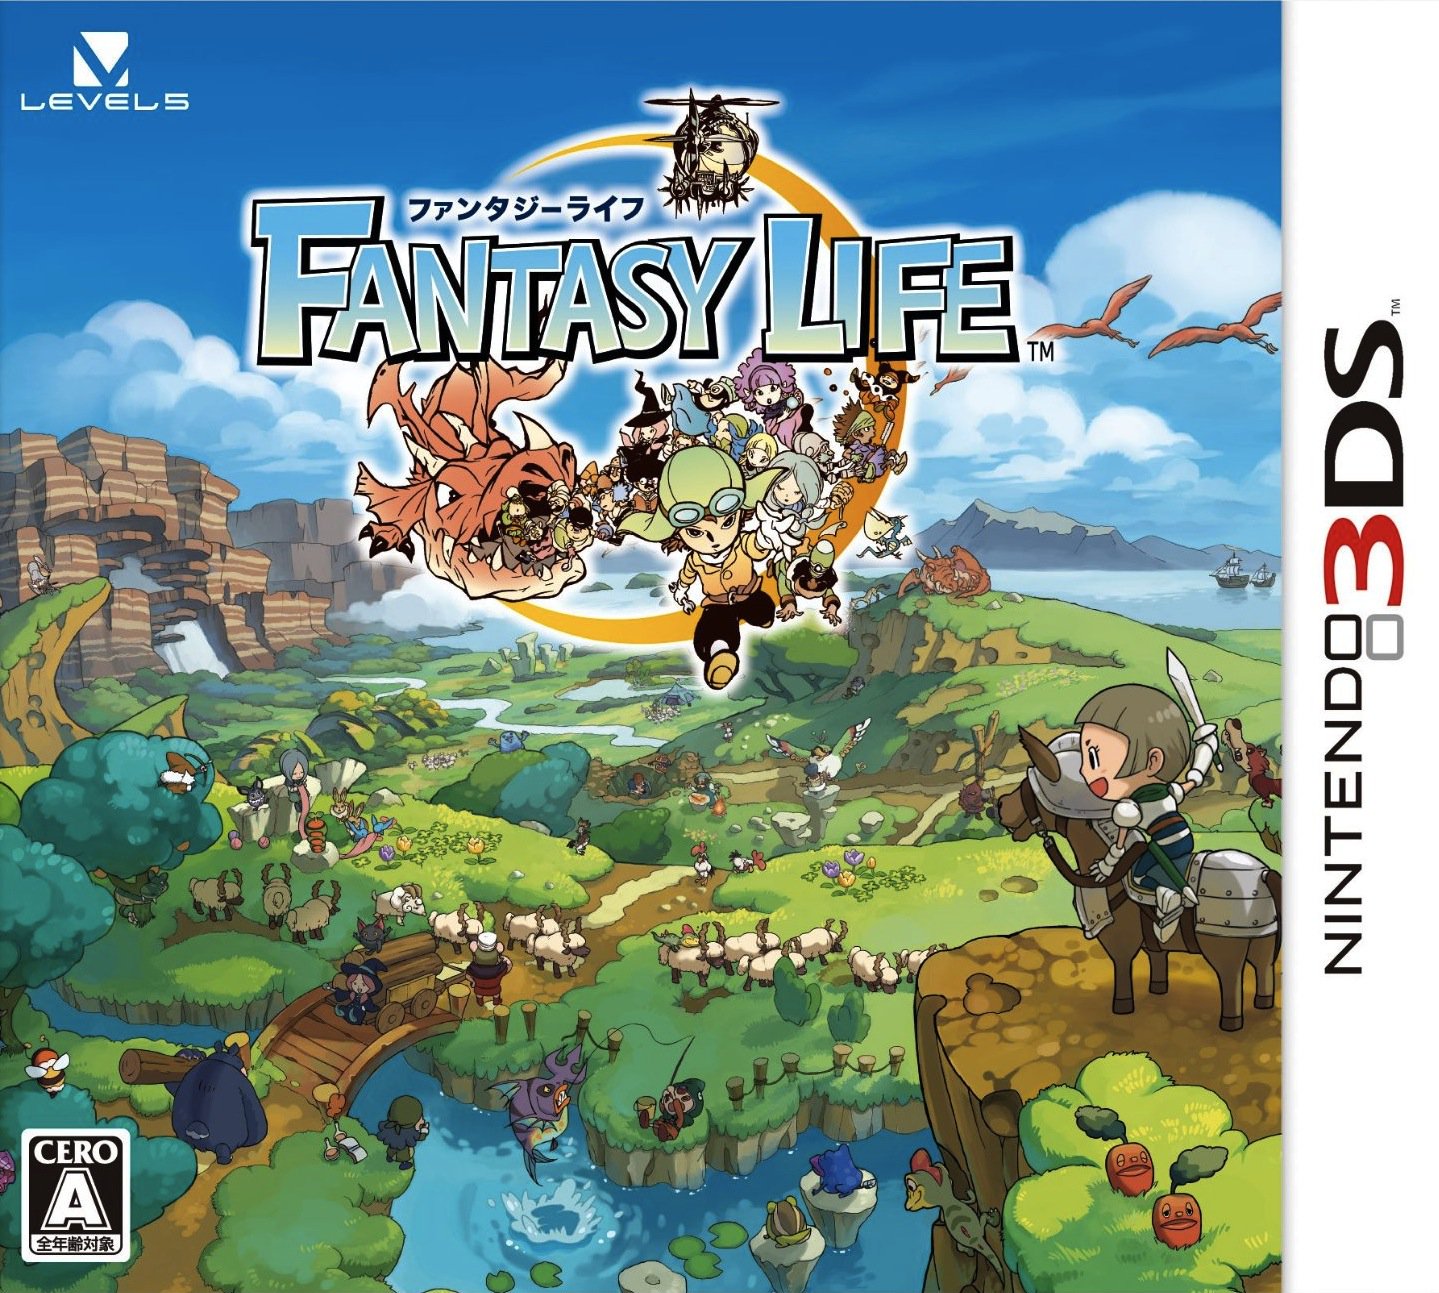 Mekaniker Fremmedgørelse brugervejledning RPG Site on Twitter: "Fantasy Life hit Nintendo 3DS for the first time  today in 2012. A little classic RPG, a little life sim from Level 5 games -  plus music from